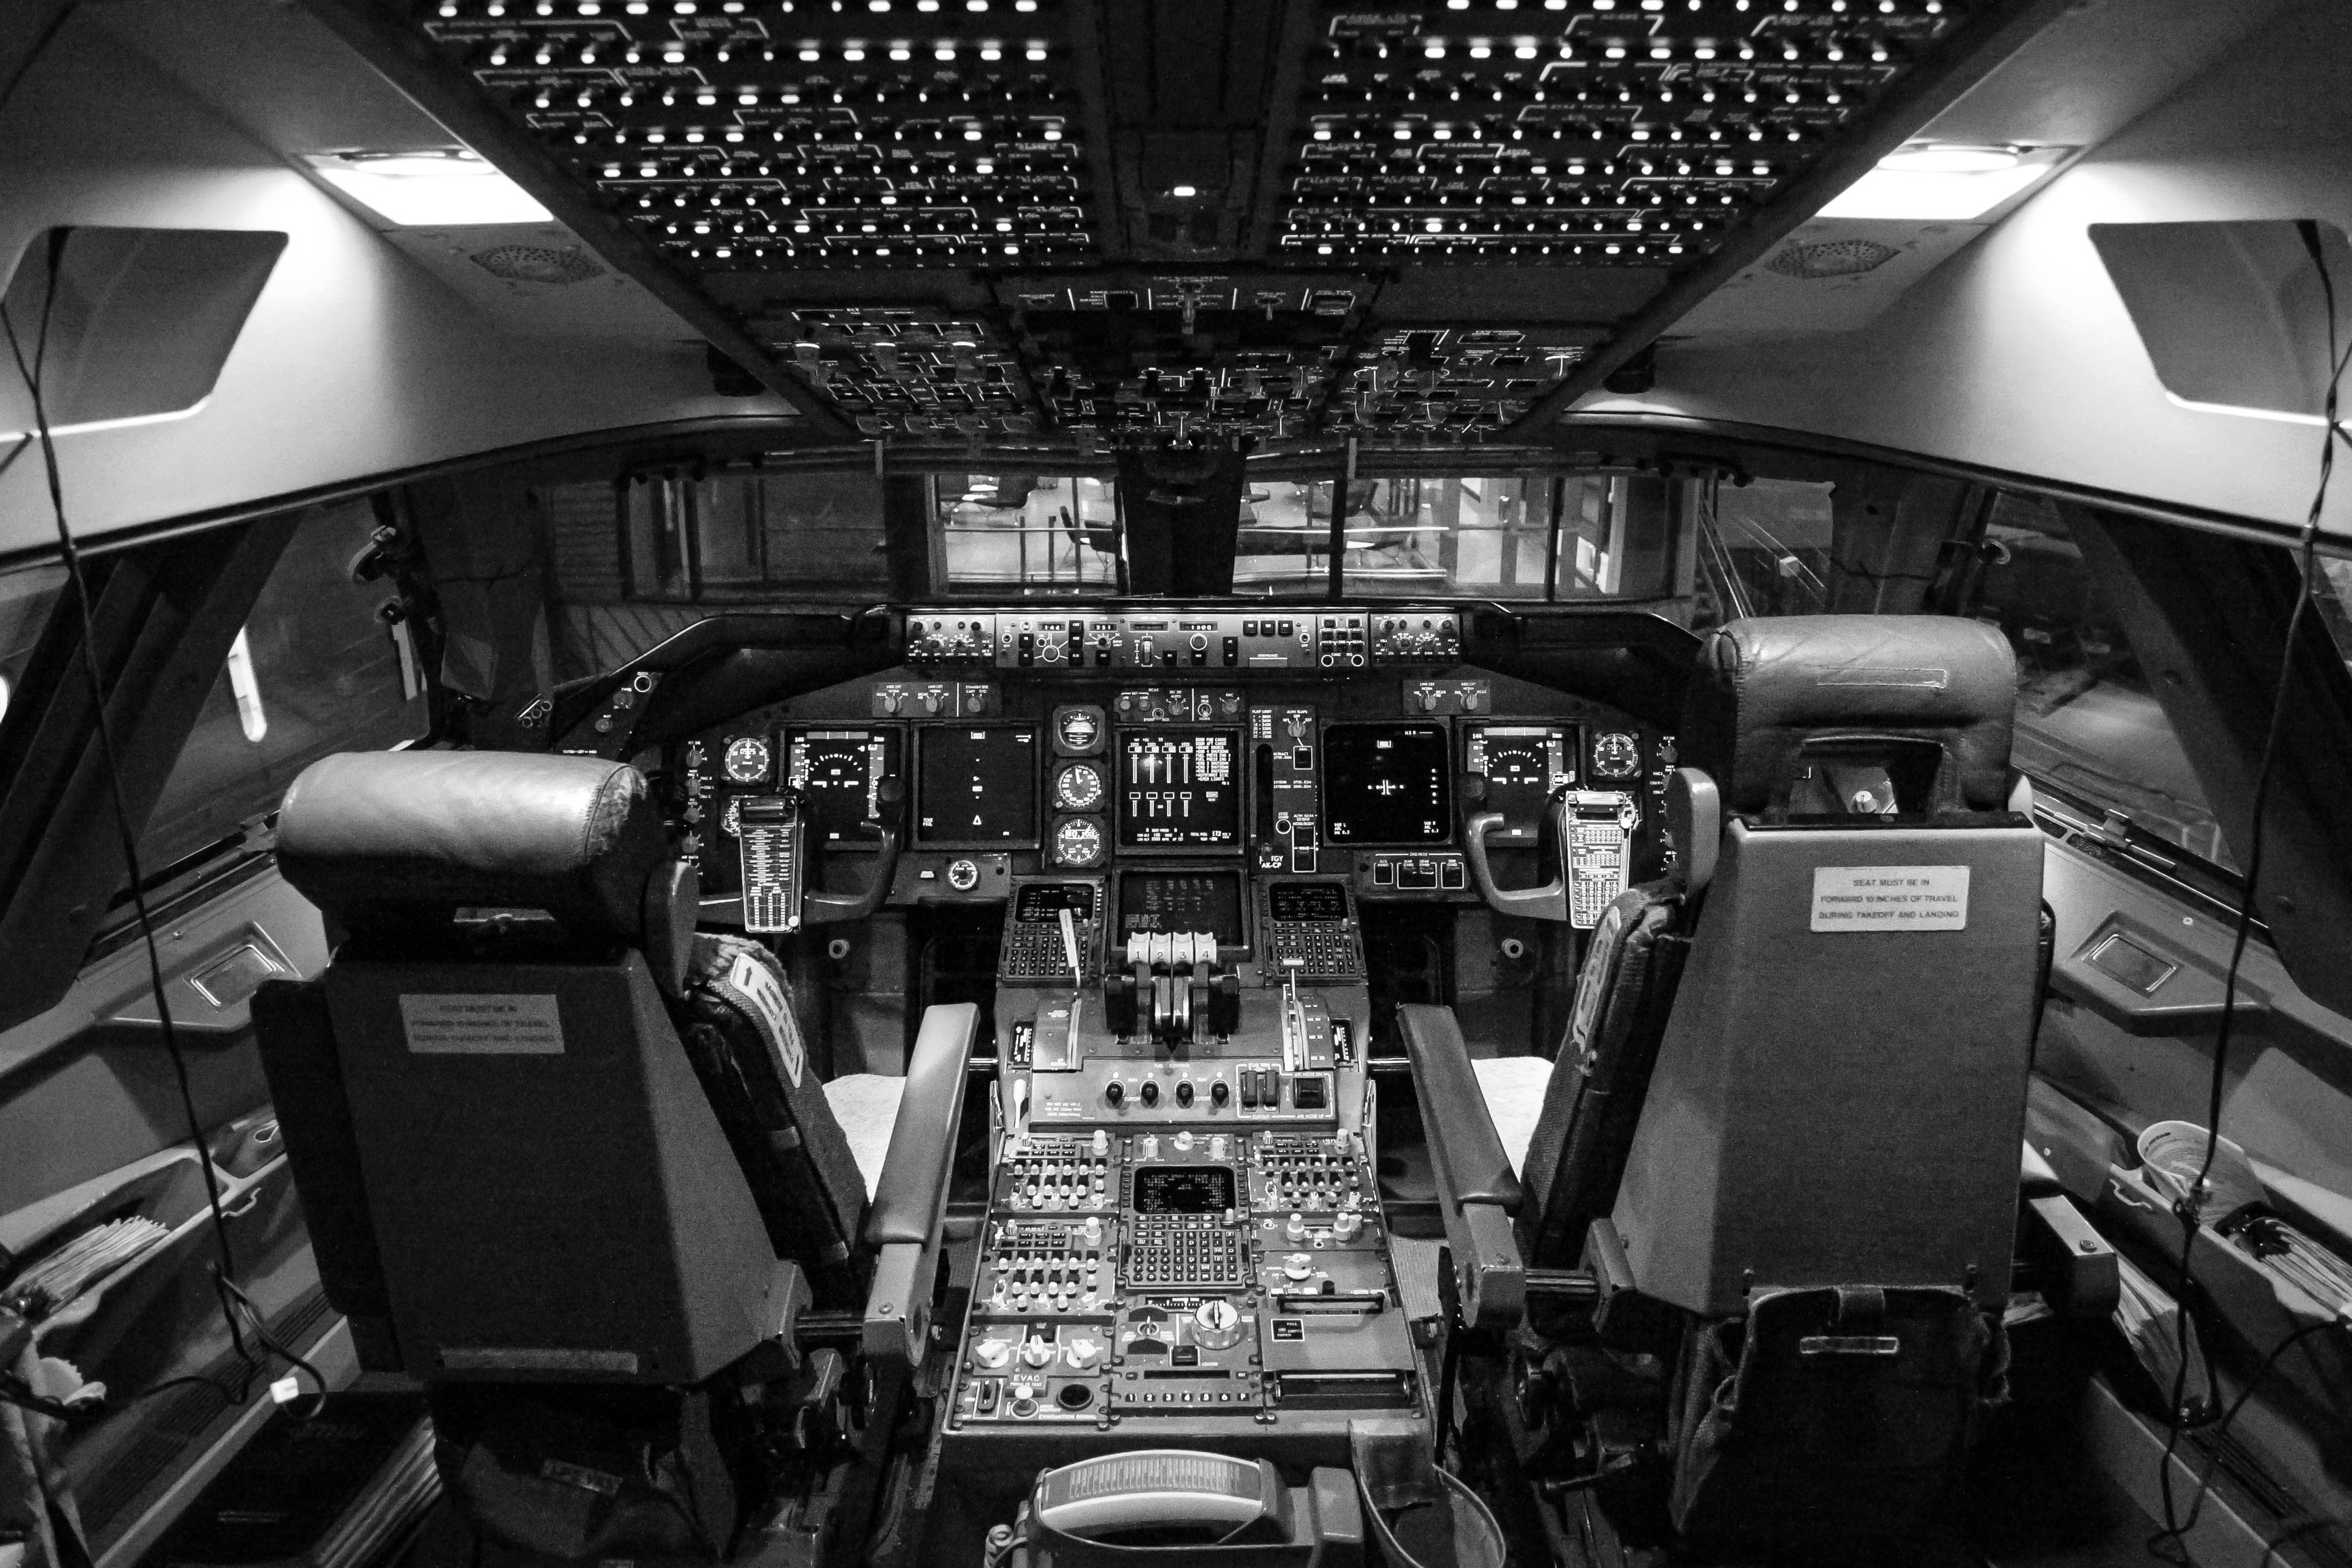 The cockpit of an aircraft, with hundreds of switches, dials and buttons.